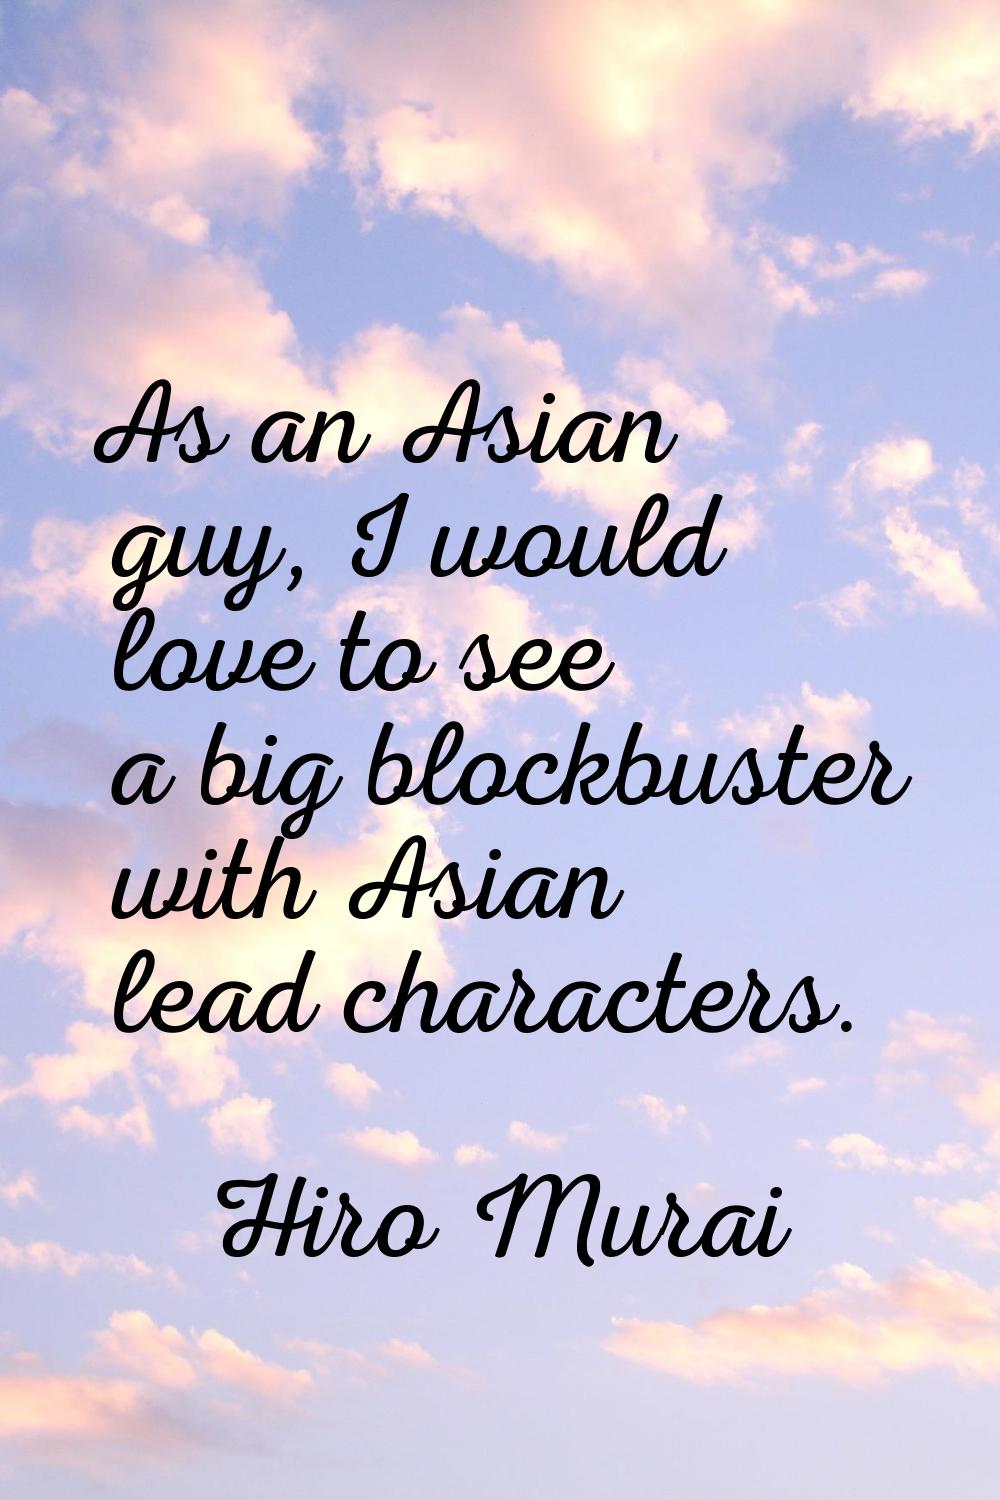 As an Asian guy, I would love to see a big blockbuster with Asian lead characters.